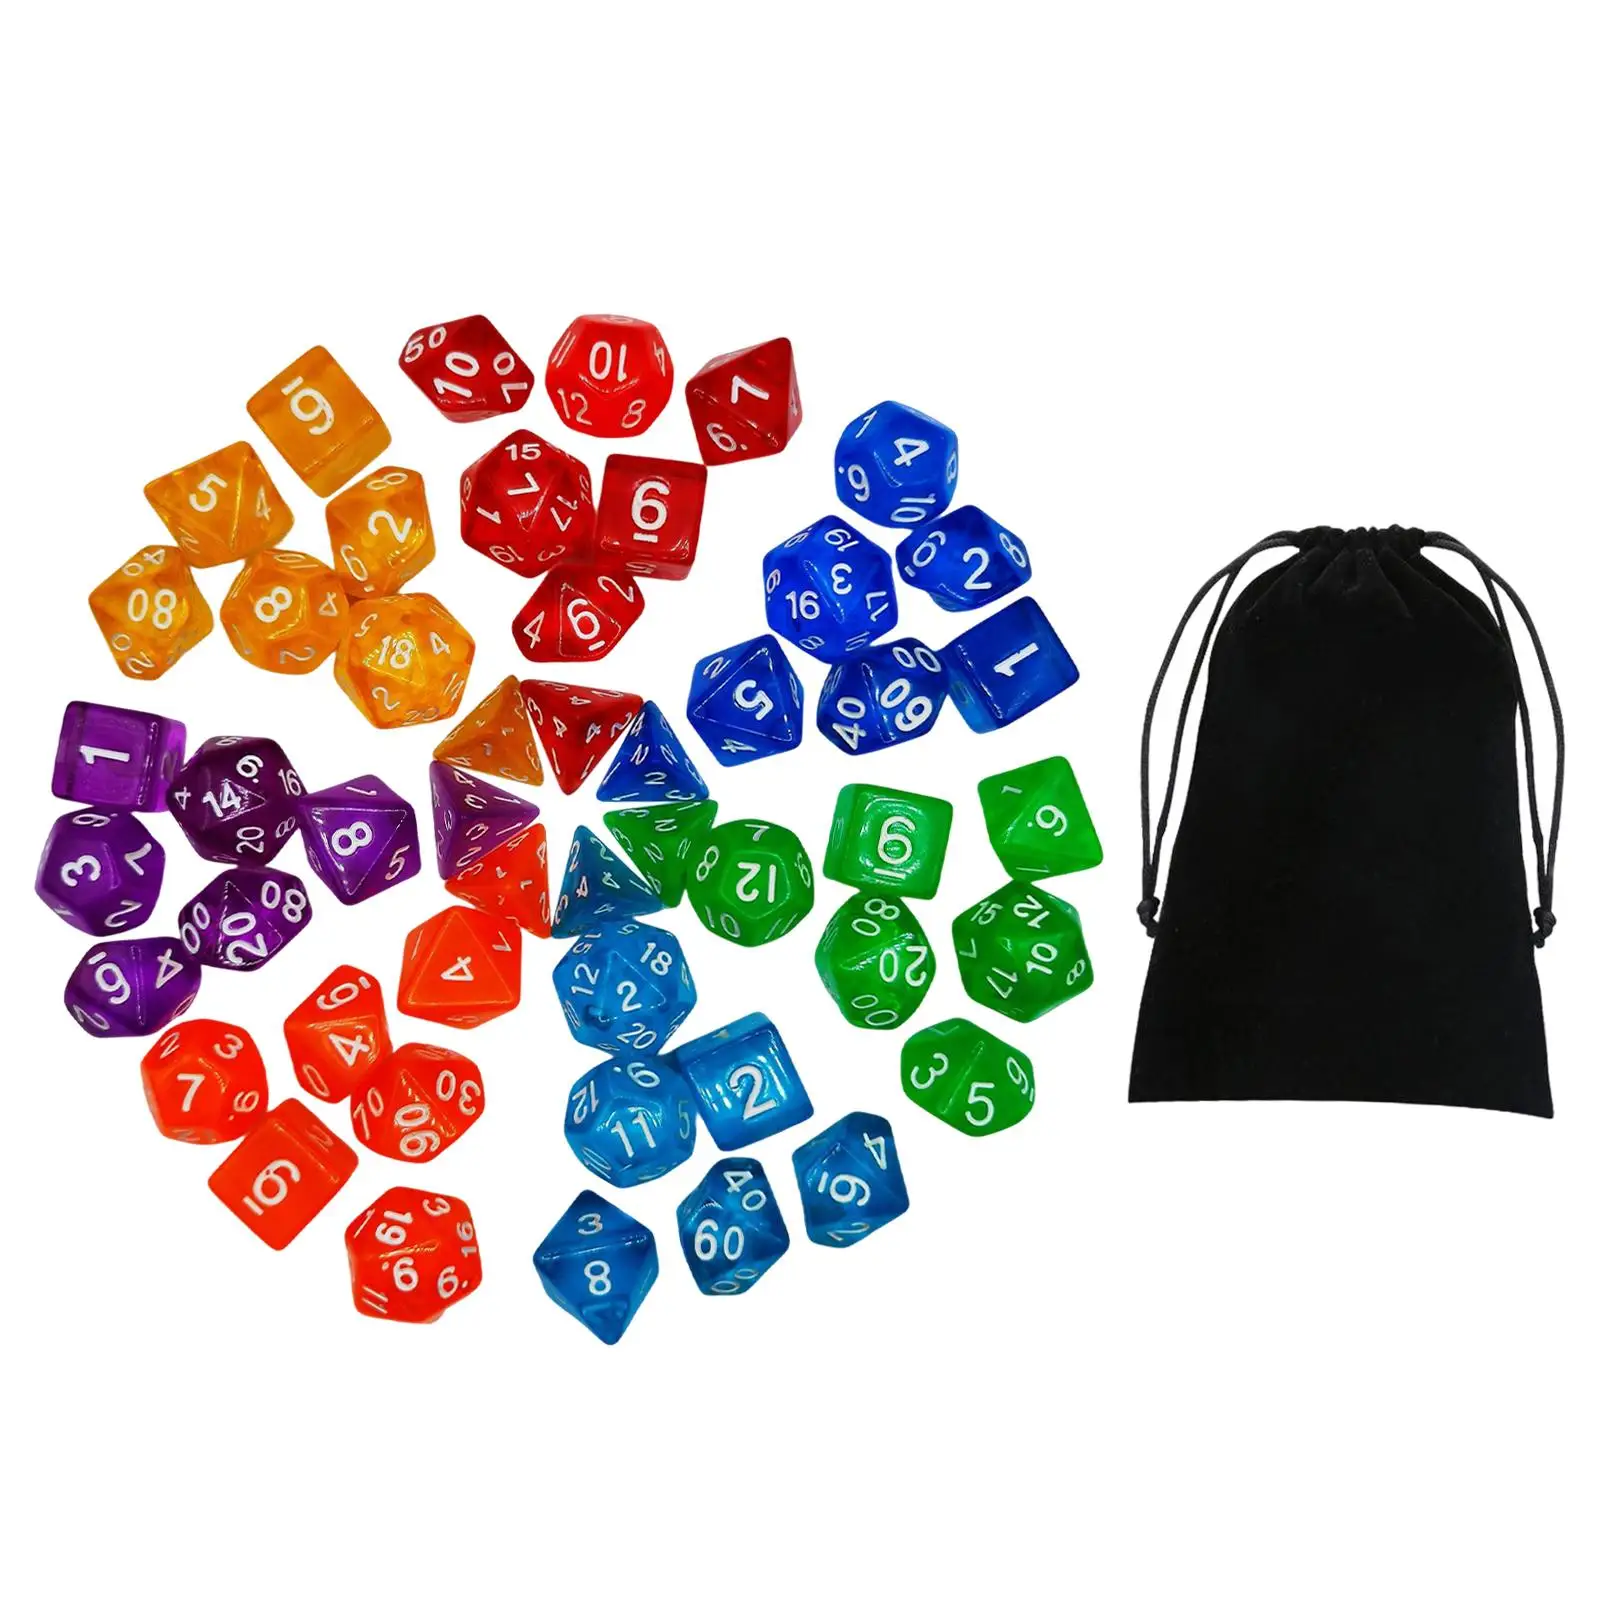 49PCS Engraved Polyhedral Dices Set D4 D6 D8 D10 D12 D20 w/ Pouch Puzzle Games Craft for DND RPG Board Games Math Teaching Aids